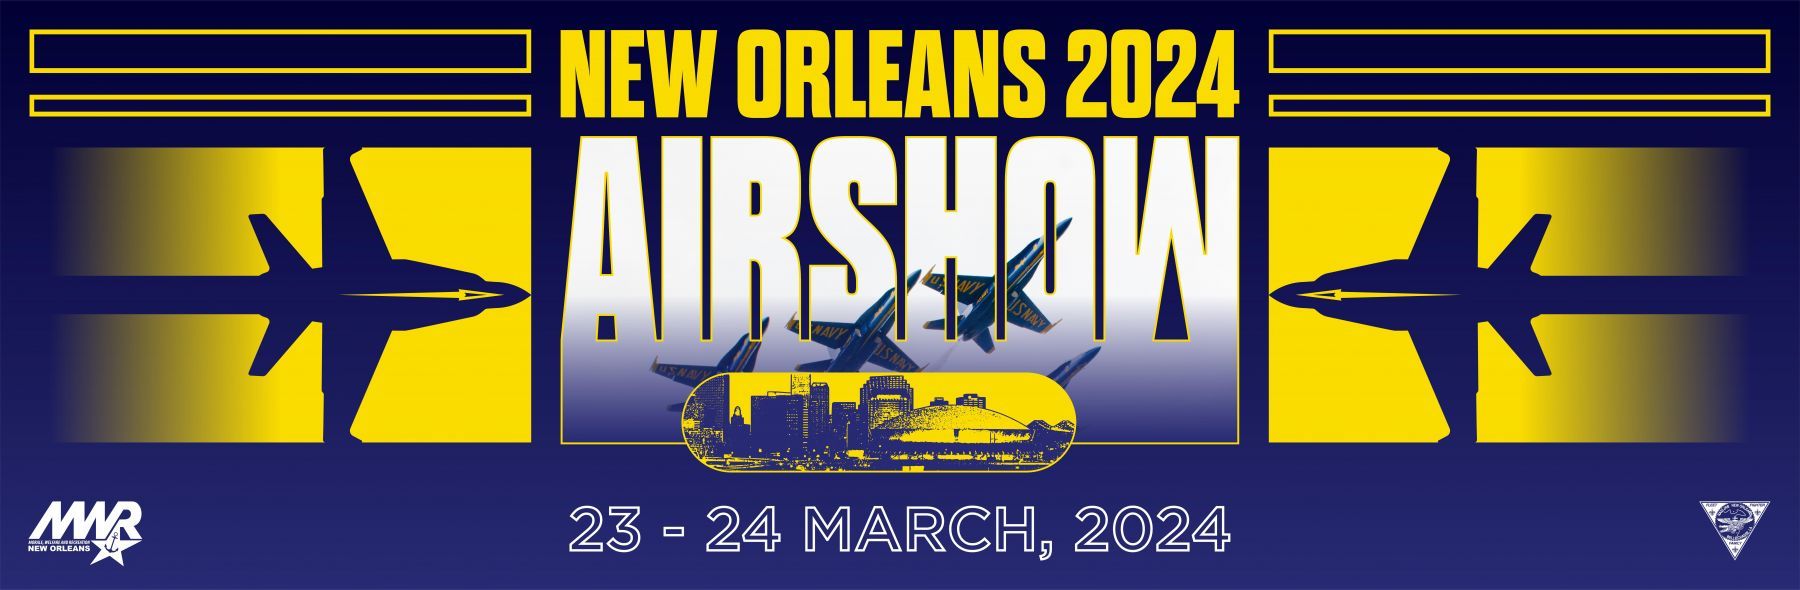 New Orleans Air Show 23 24 mars 2024 Airshow Display